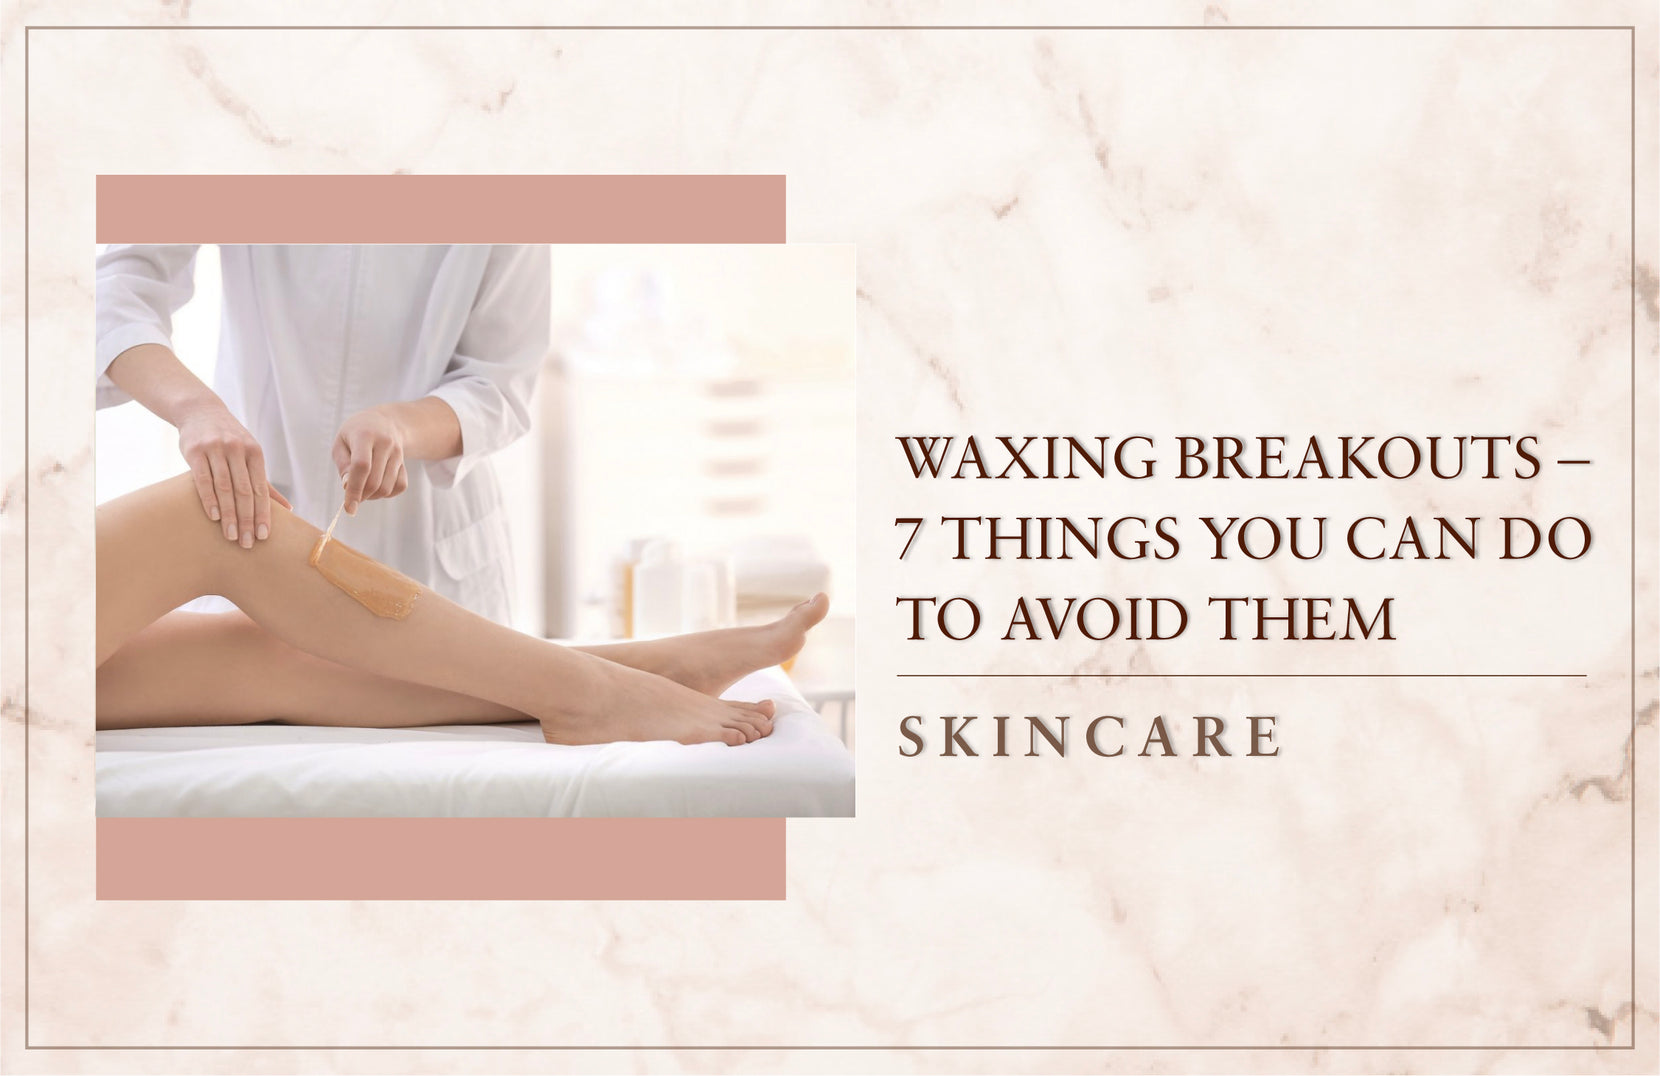 Waxing Breakouts-7 Things You Can Do To Avoid Them